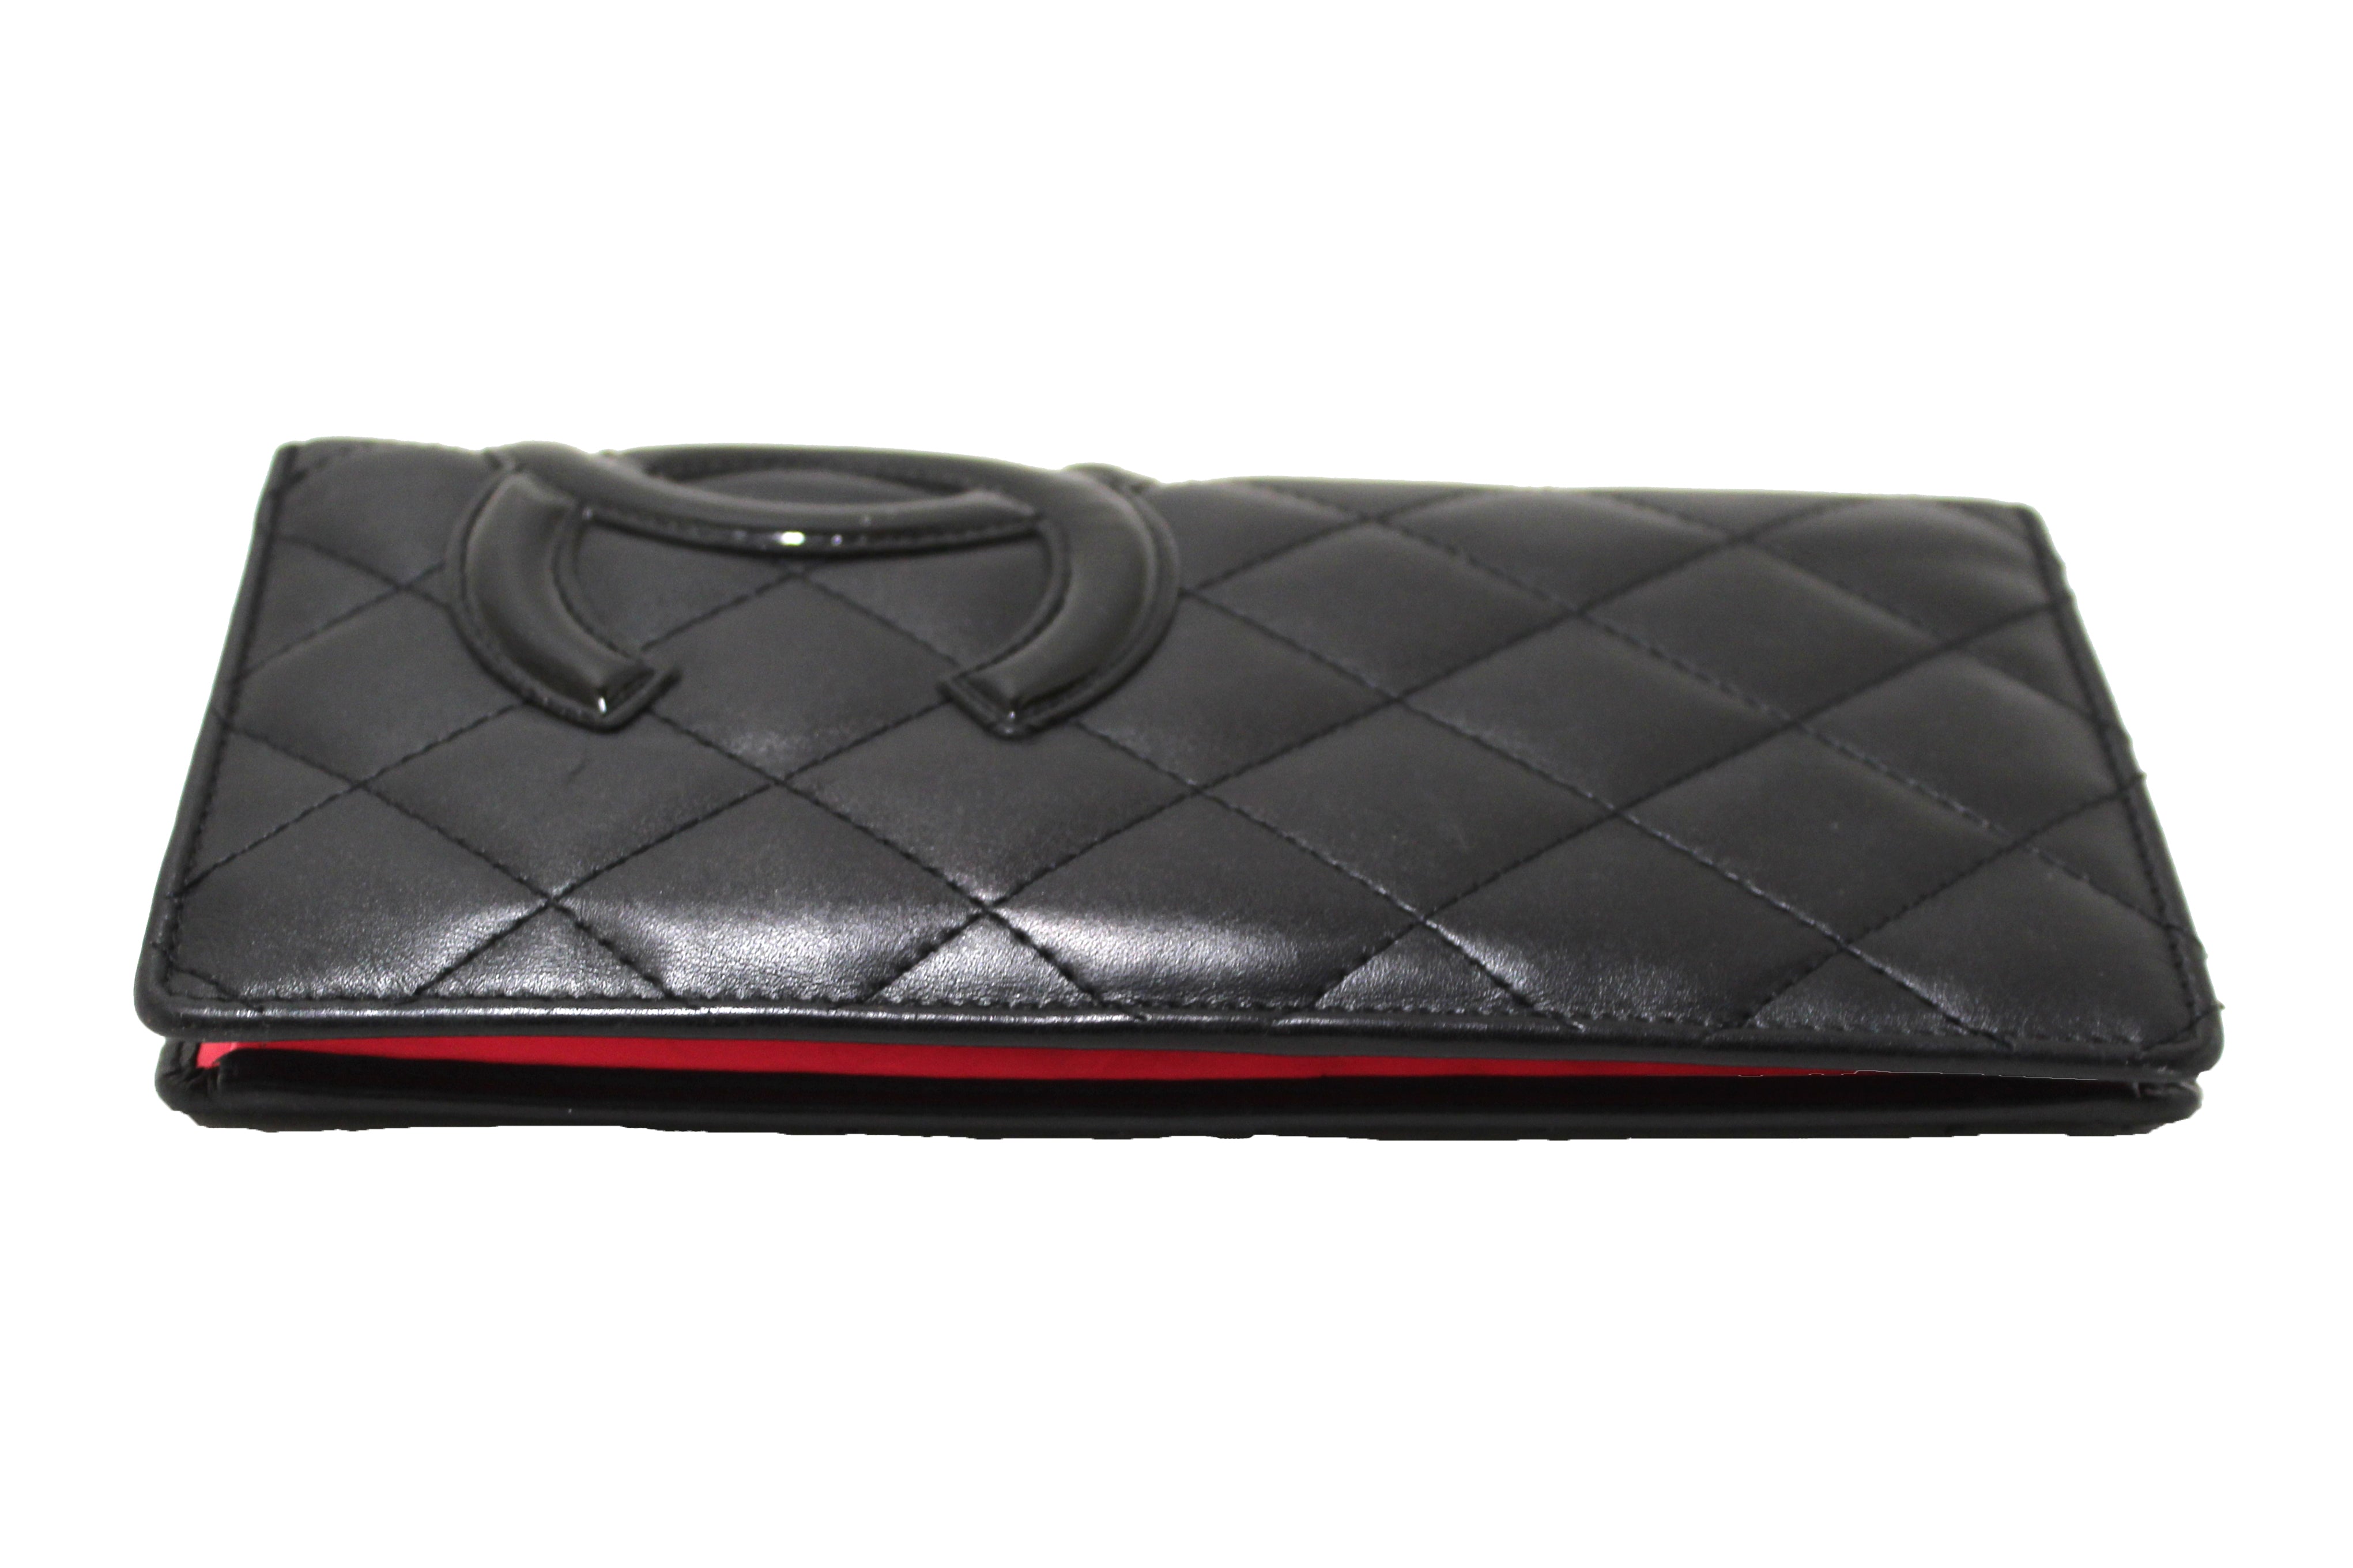 Authentic Chanel Black Quilted Calfskin Leather Cambon Wallet